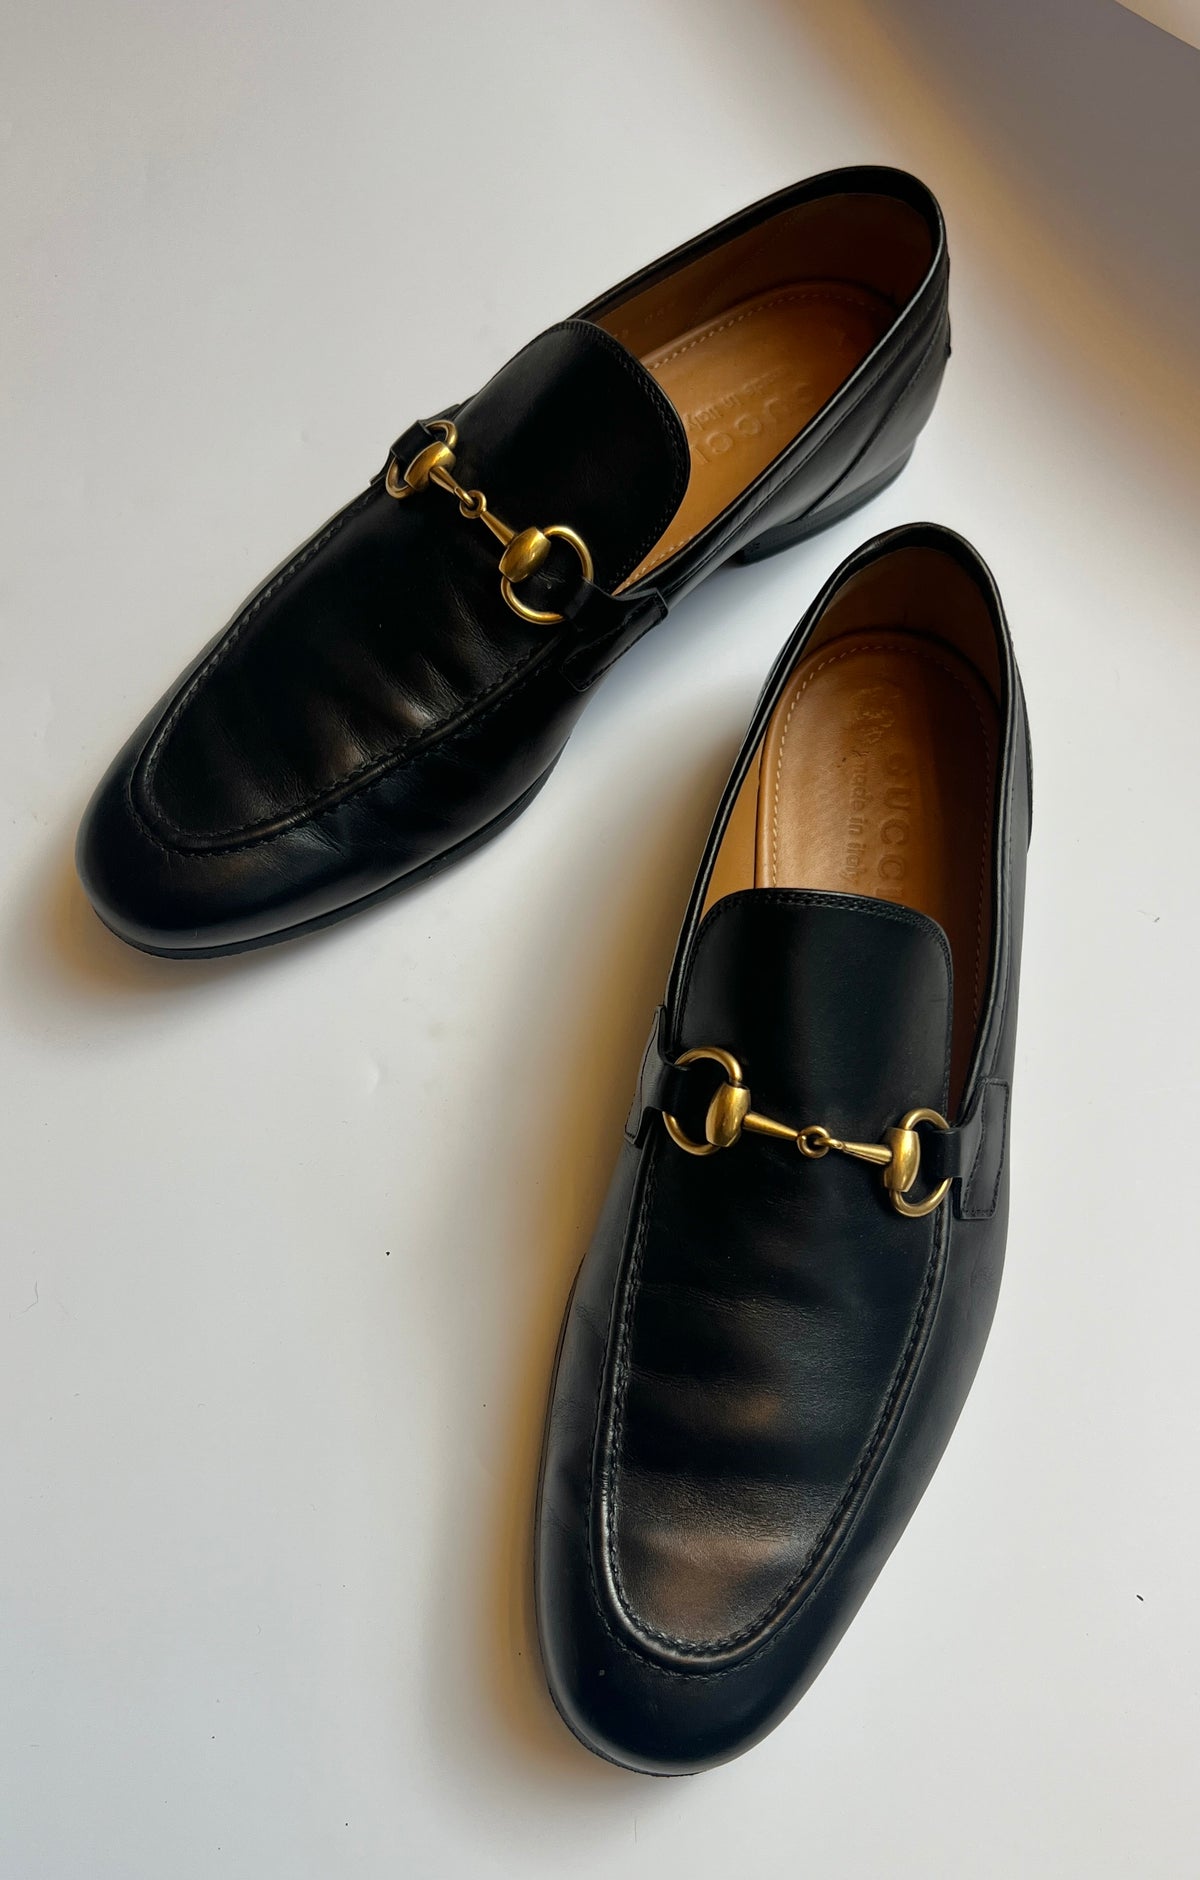 GUCCI 1953 Loafer